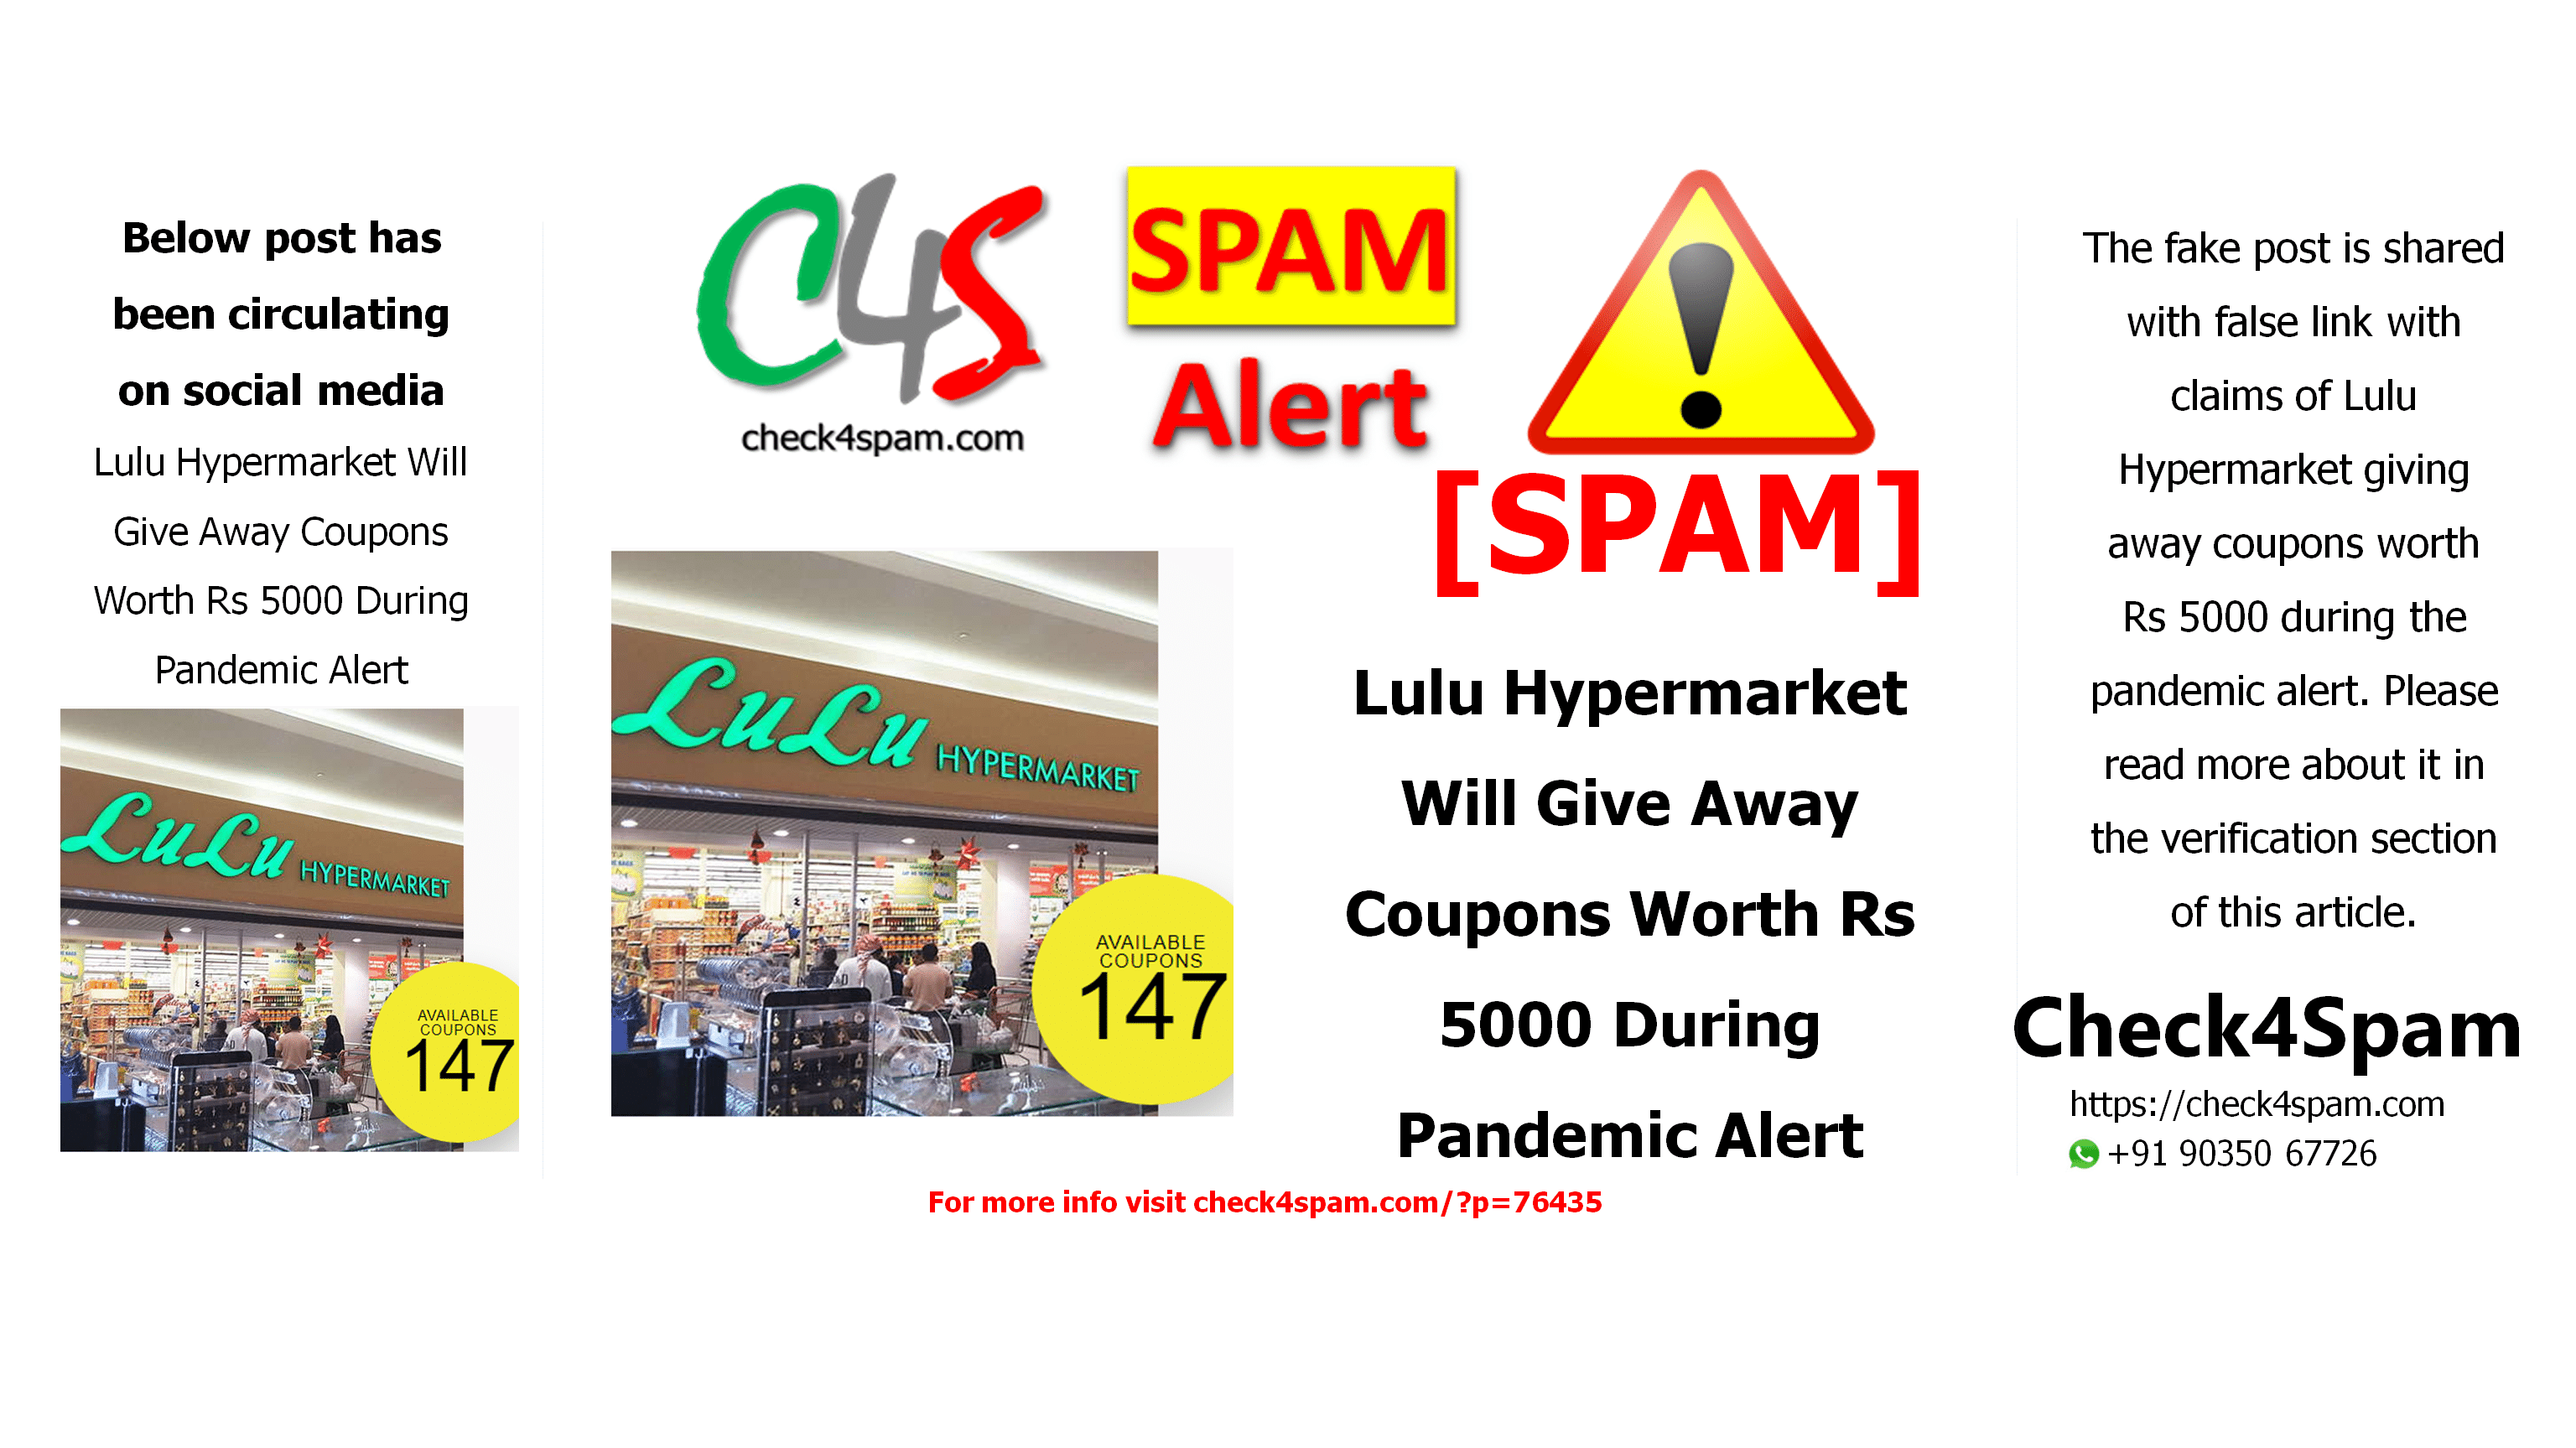 Lulu Hypermarket Will Give Away Coupons Worth Rs 5000 During Pandemic Alert